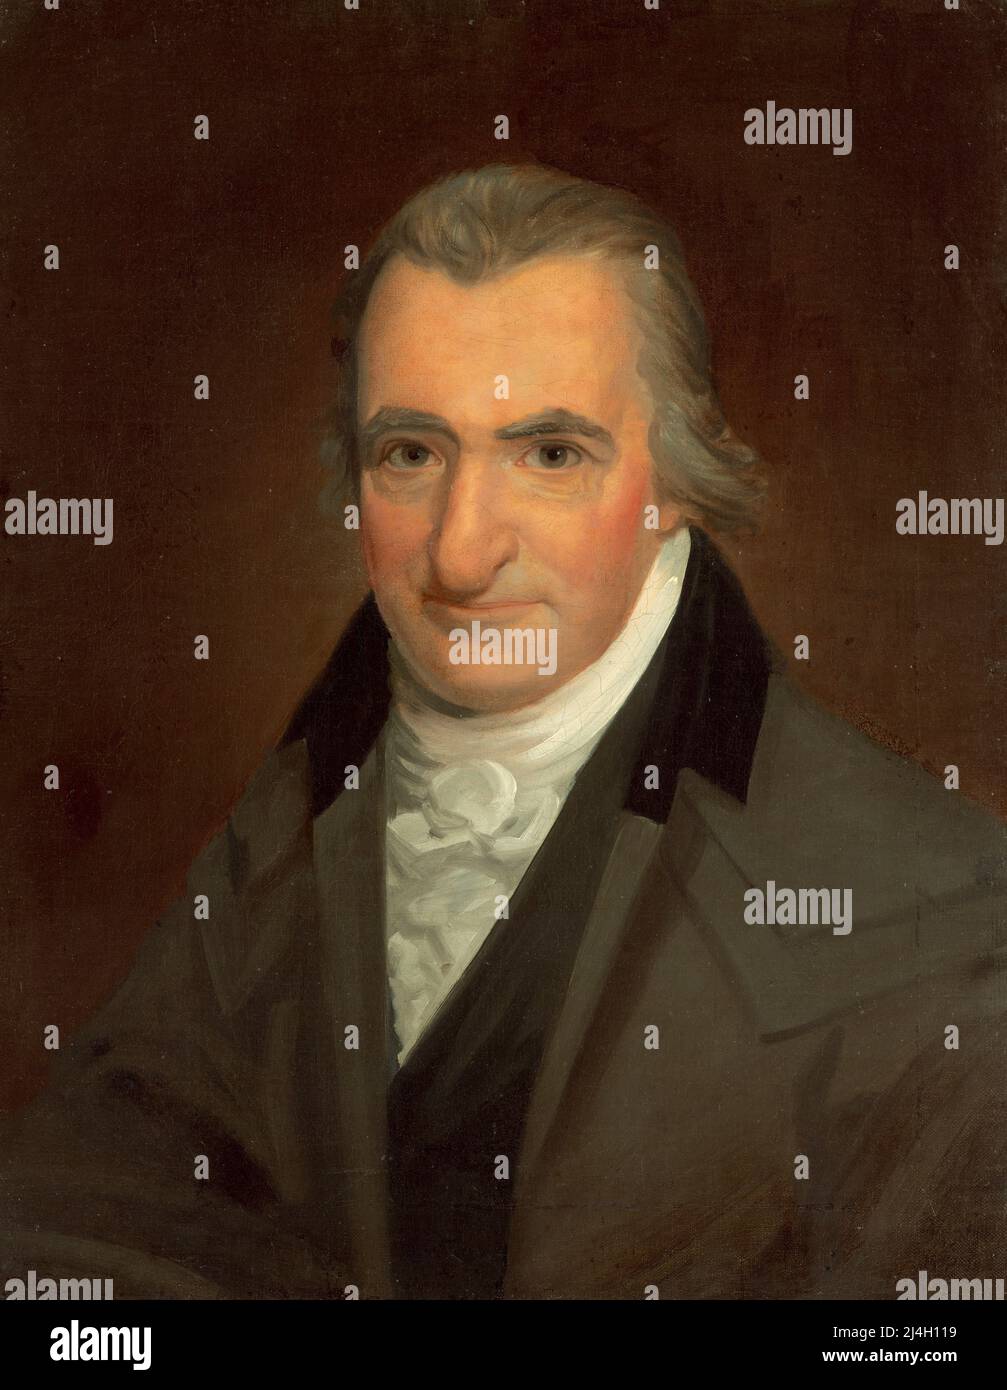 Thomas Paine, Painting by John Wesley Jarvis. Thomas Paine (born Thomas Pain; 1737 – 1809)  English-born American political activist, philosopher, political theorist, and revolutionary. Stock Photo